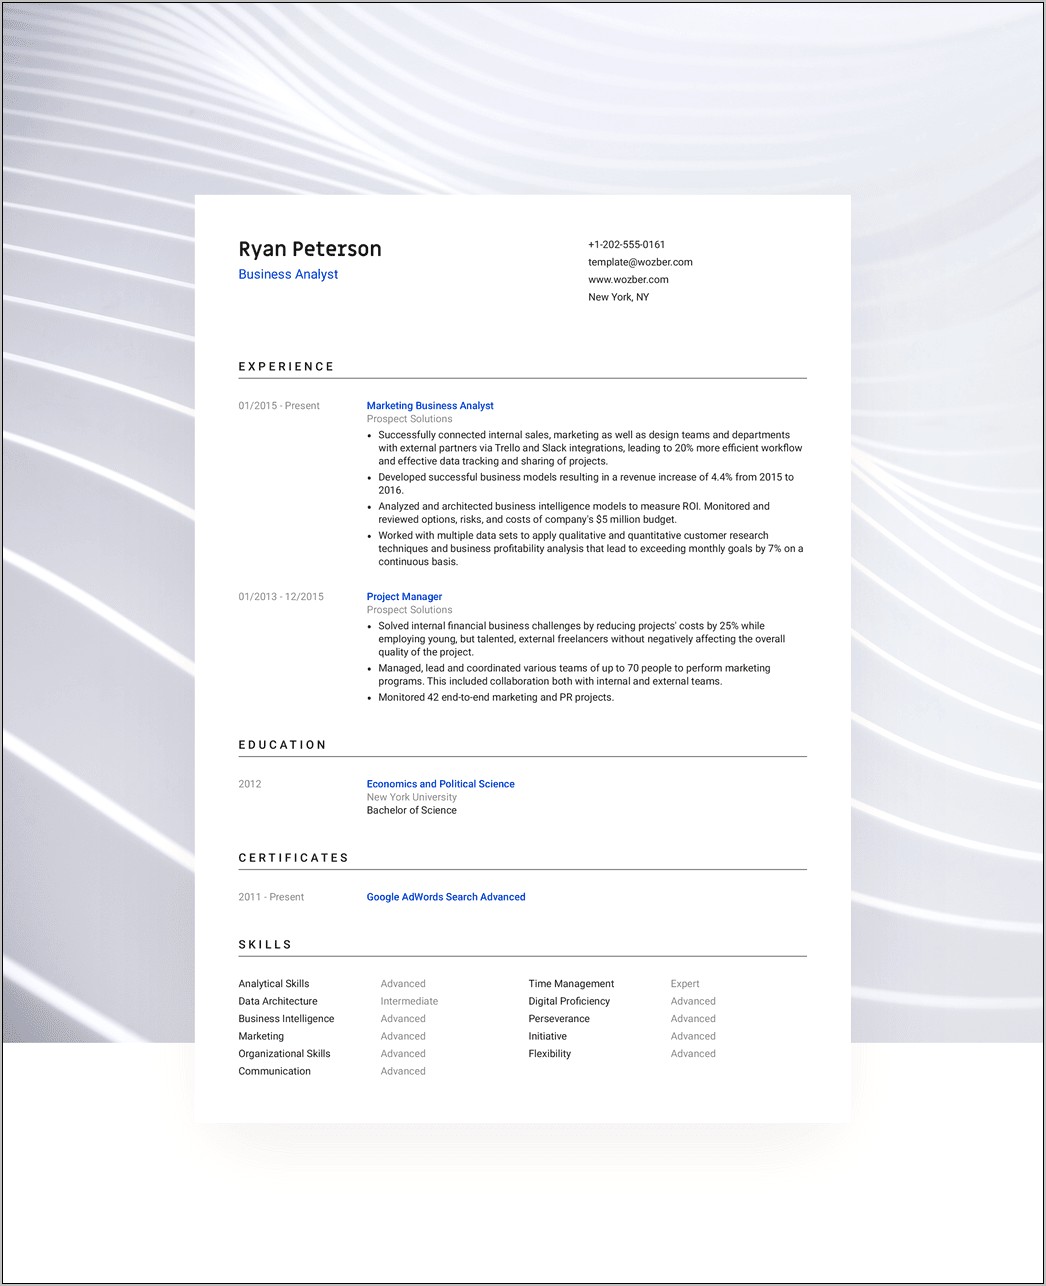 Best Ats Website For Resumes